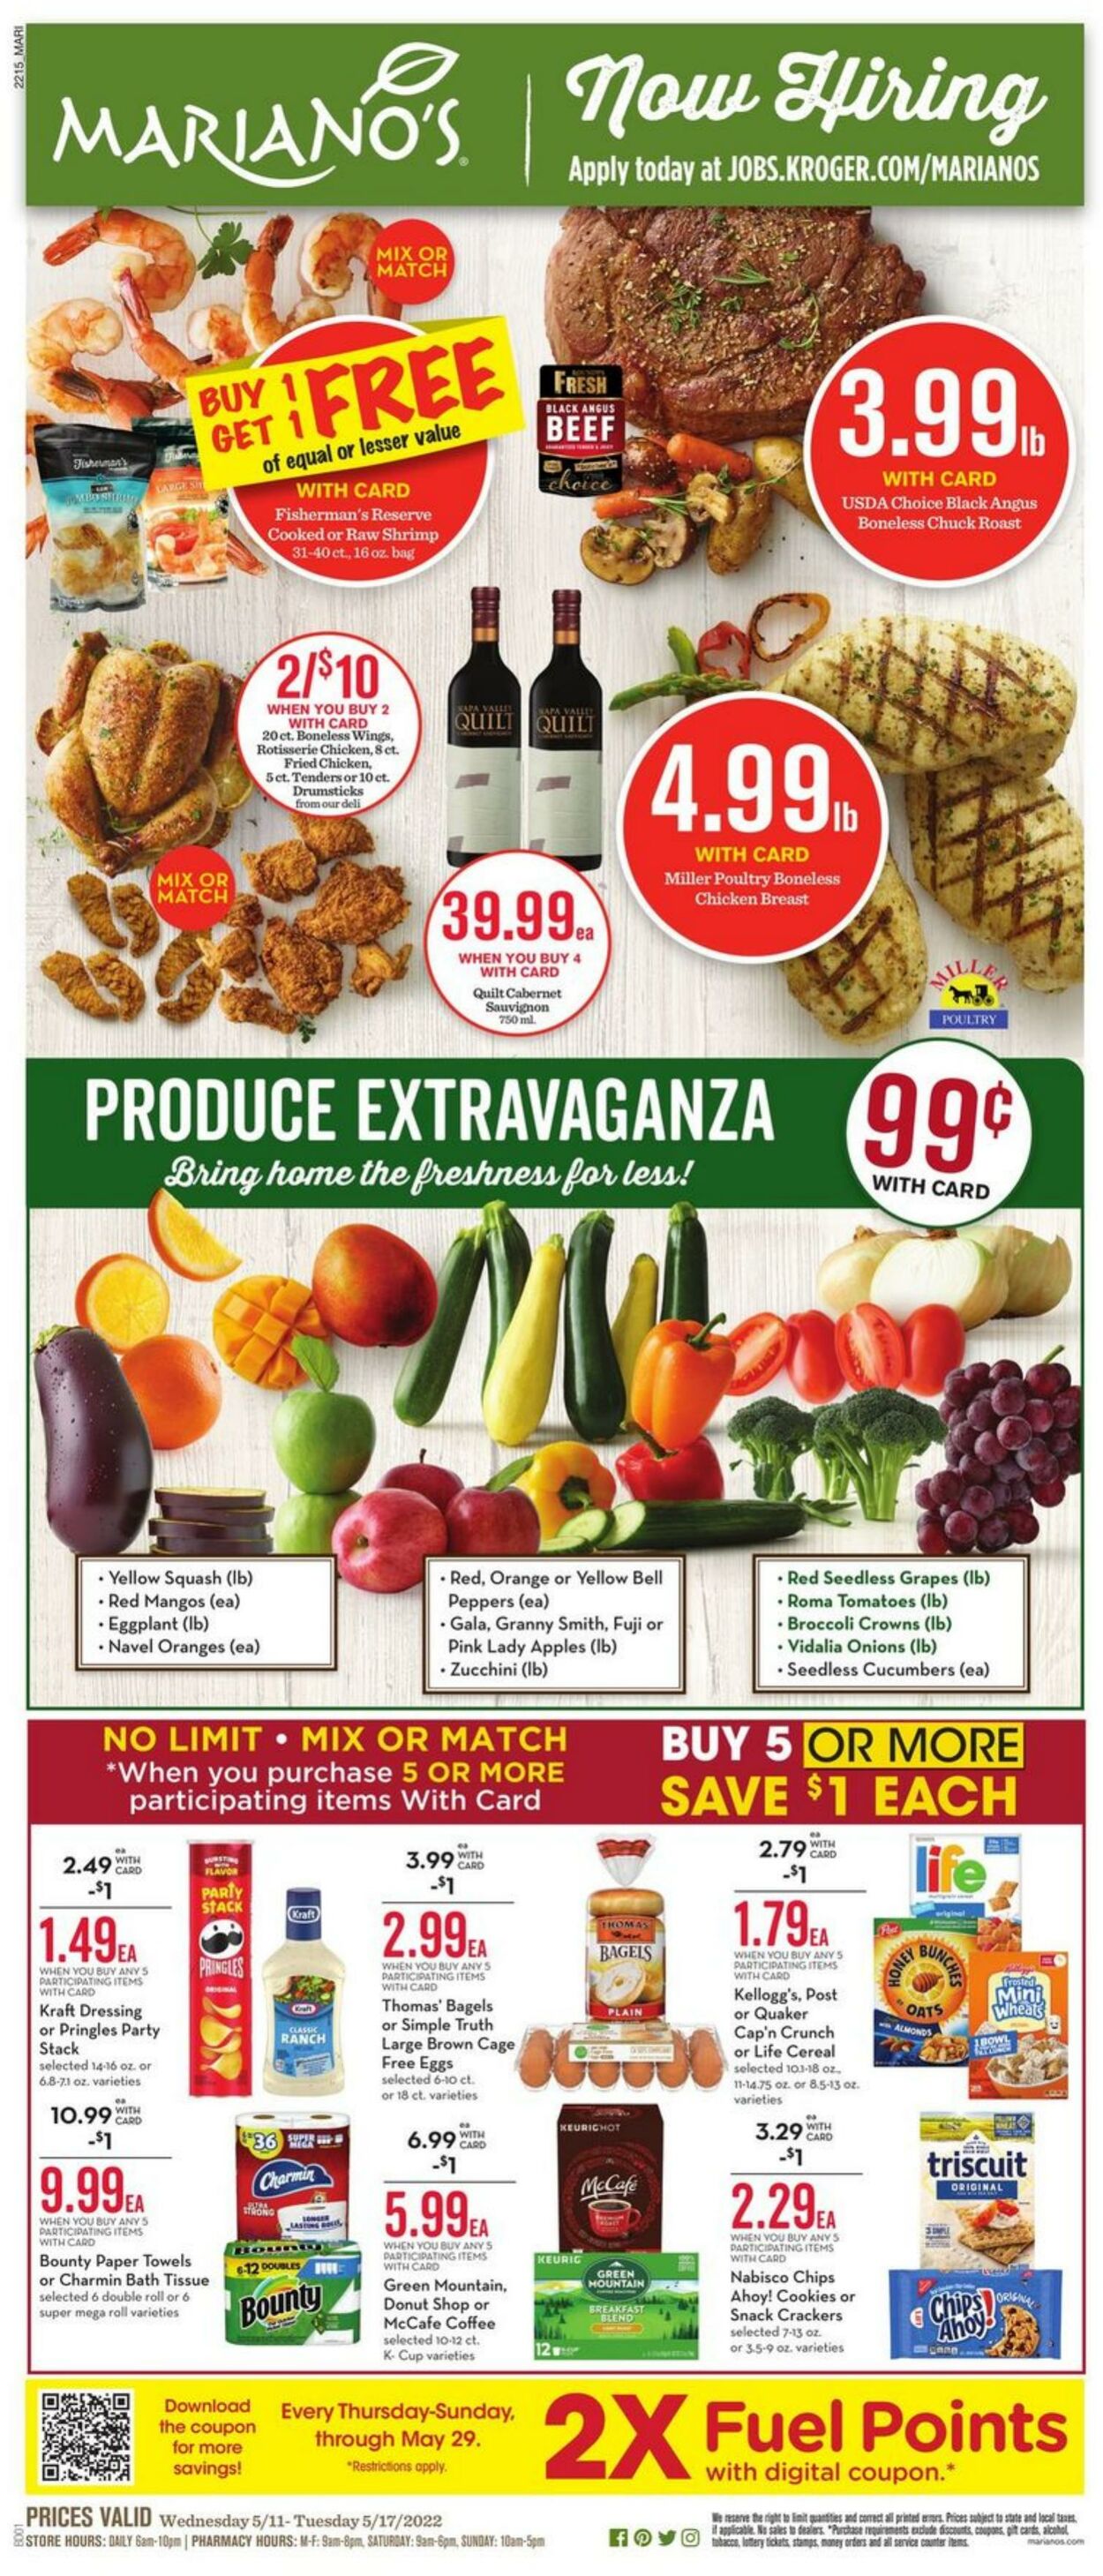 Mariano's Promotional weekly ads